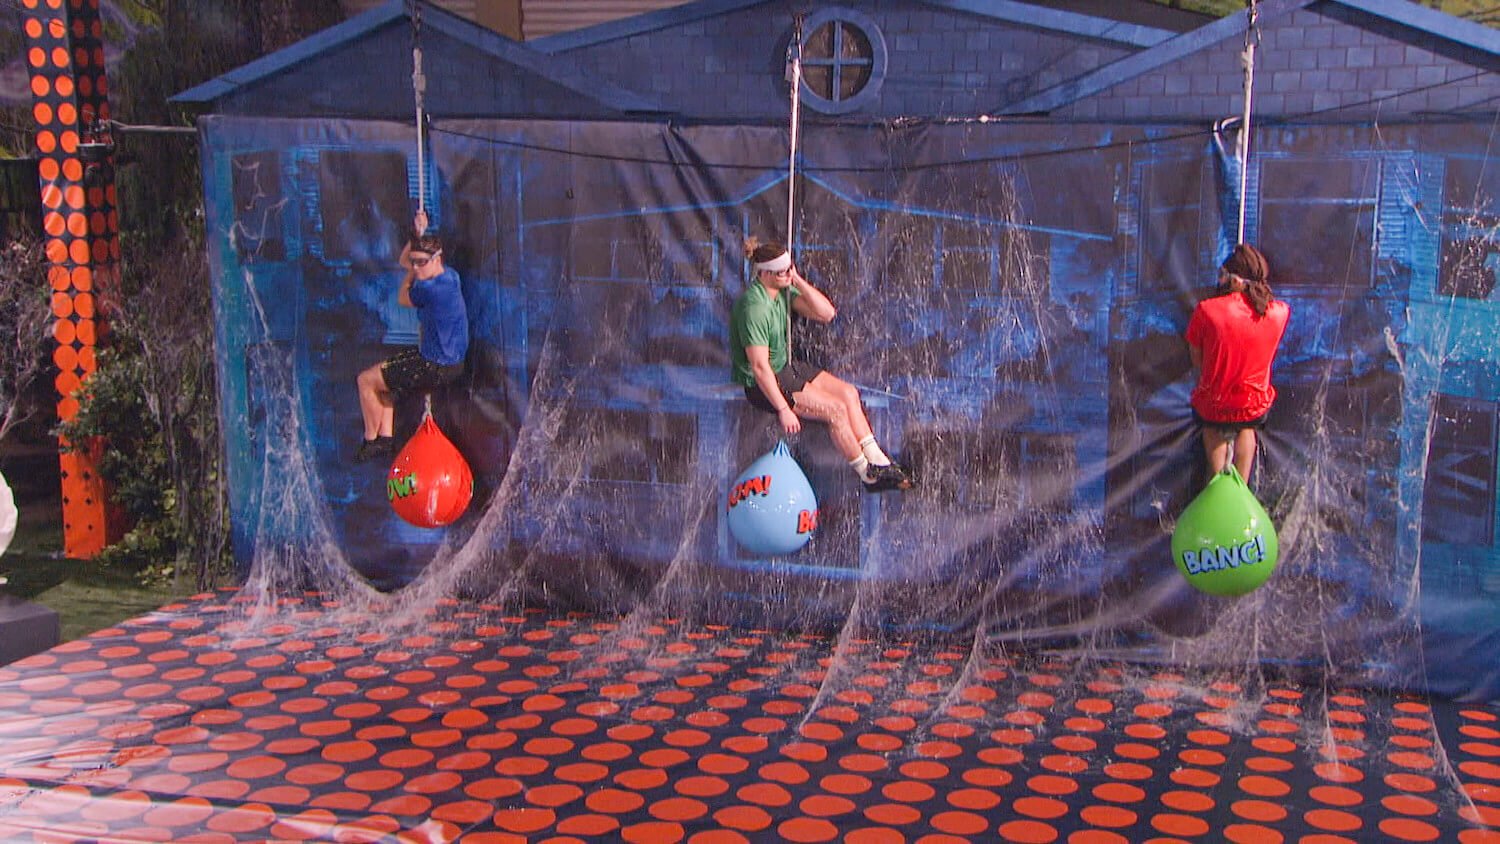 Bowie Jane, Matt Klotz, and Jag Bains competing for the Head of Household in the 'Big Brother' Season 25 finale